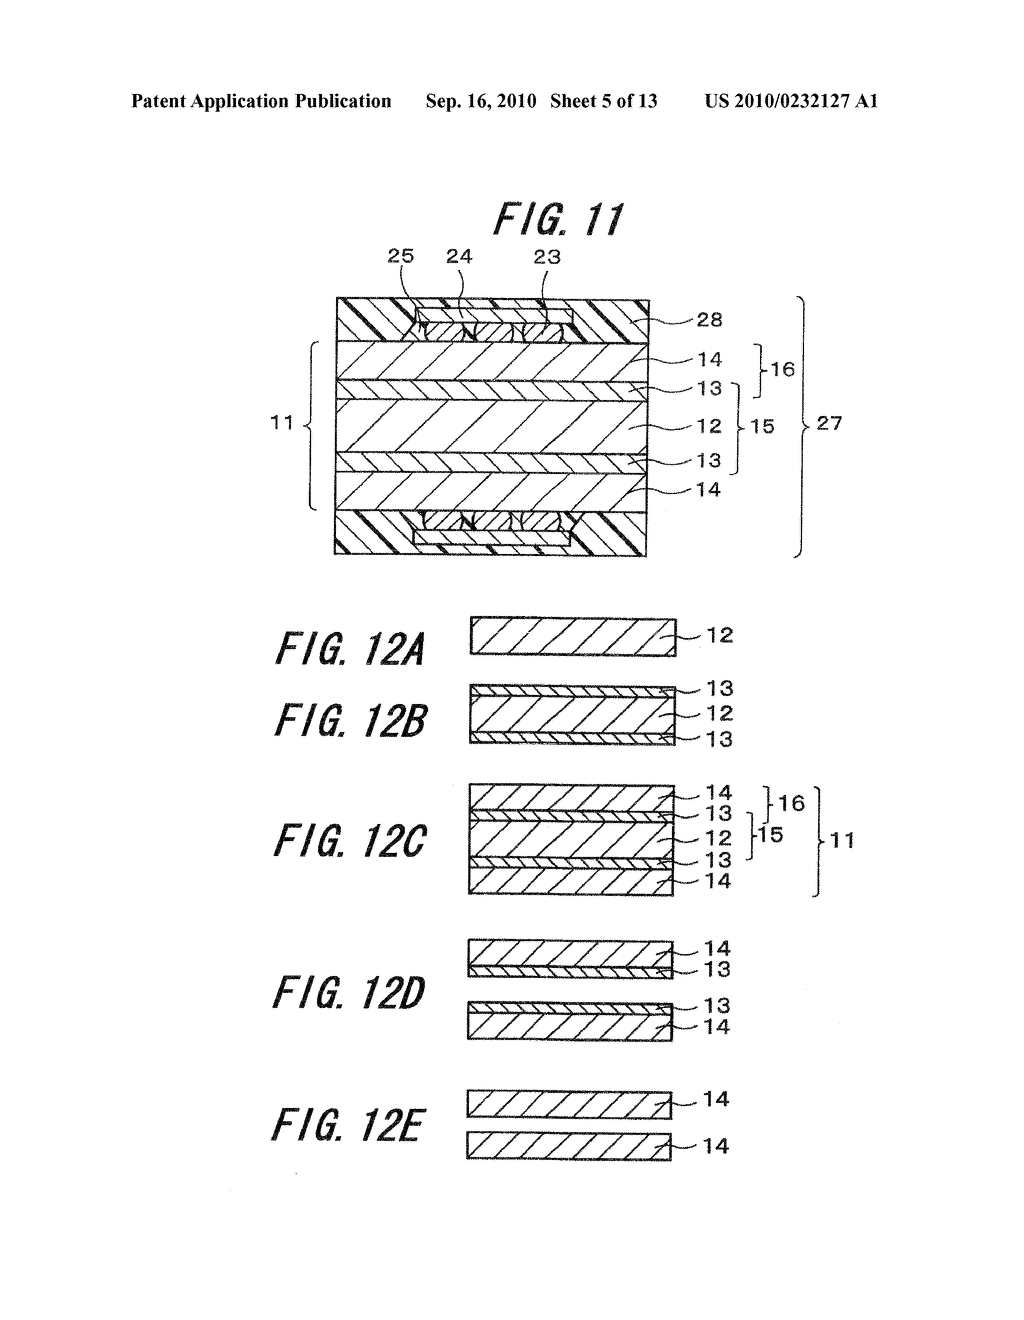 WIRING BOARD COMPOSITE BODY, SEMICONDUCTOR DEVICE, AND METHOD FOR MANUFACTURING THE WIRING BOARD COMPOSITE BODY AND THE SEMICONDUCTOR DEVICE - diagram, schematic, and image 06